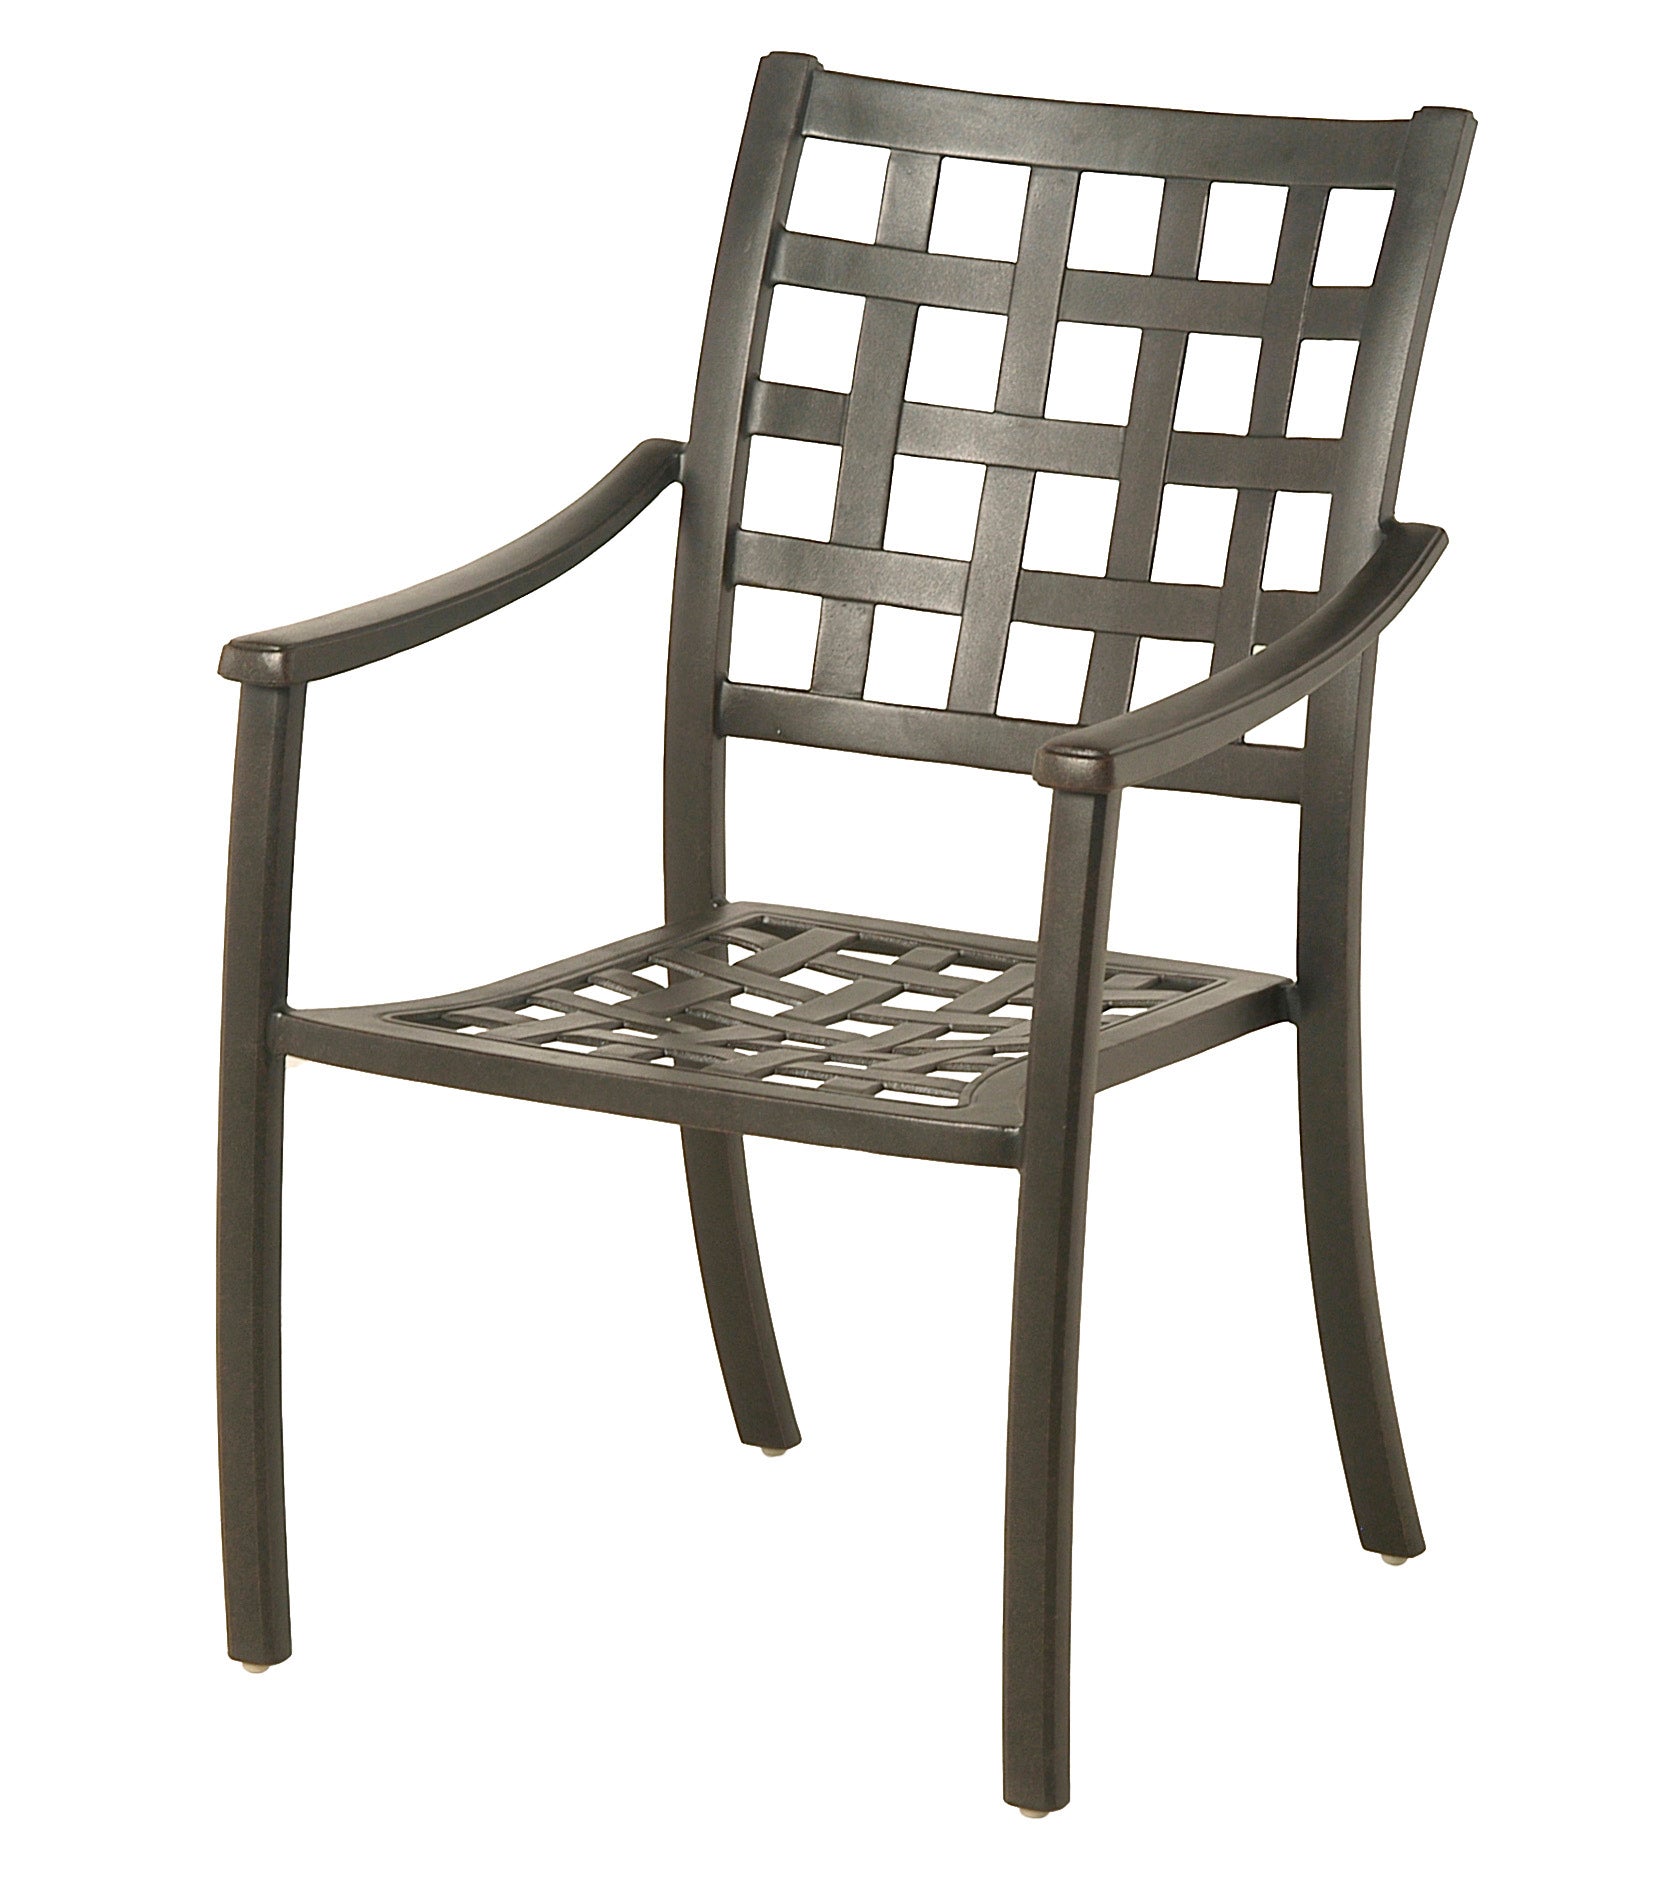 Hanamint Stratford Dining Chair Outdoor Chairs 12025052